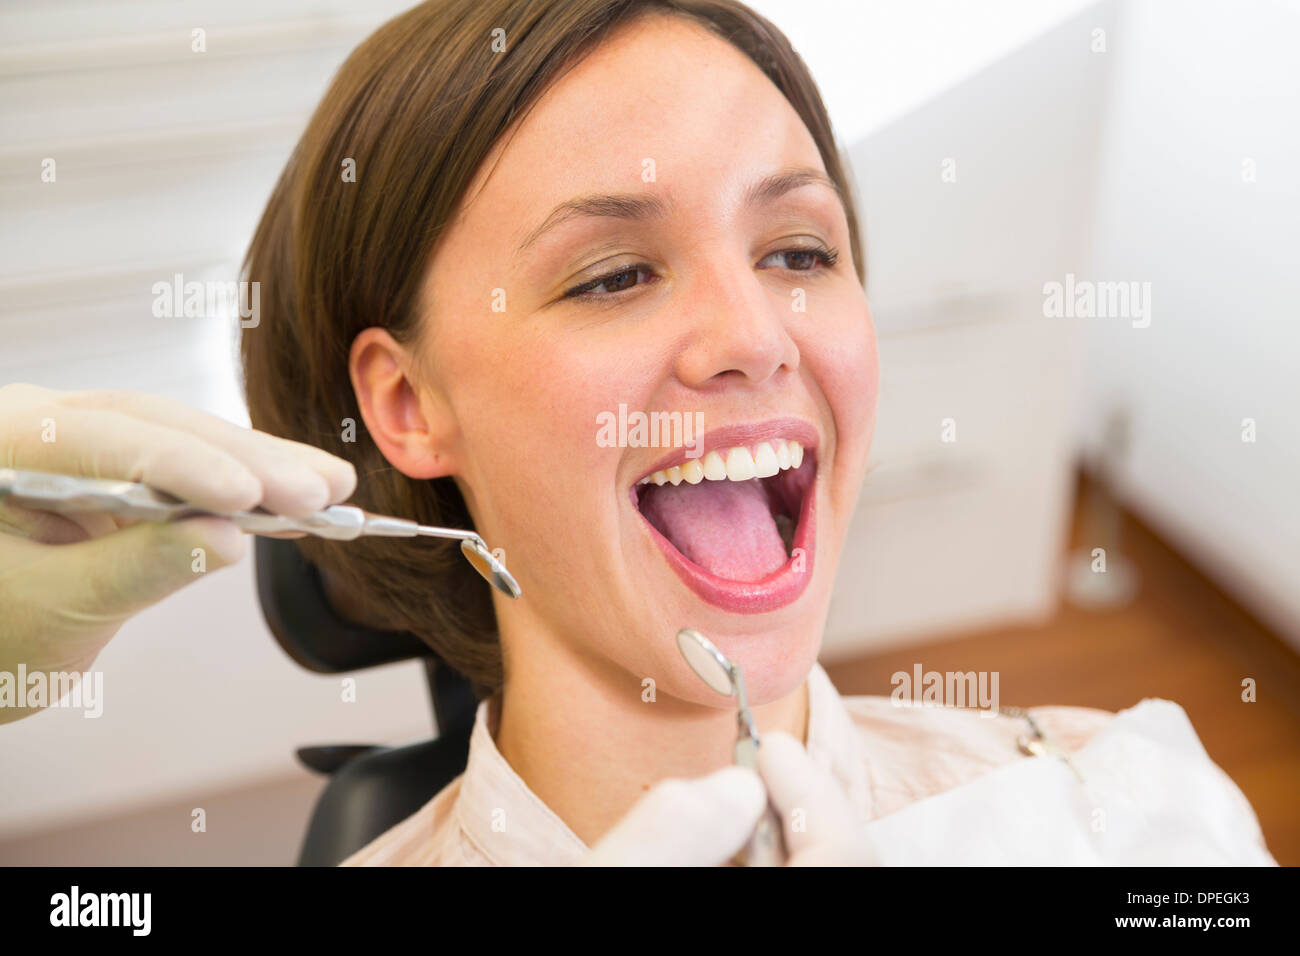 Woman having check up at dentists with mouth open Stock Photo